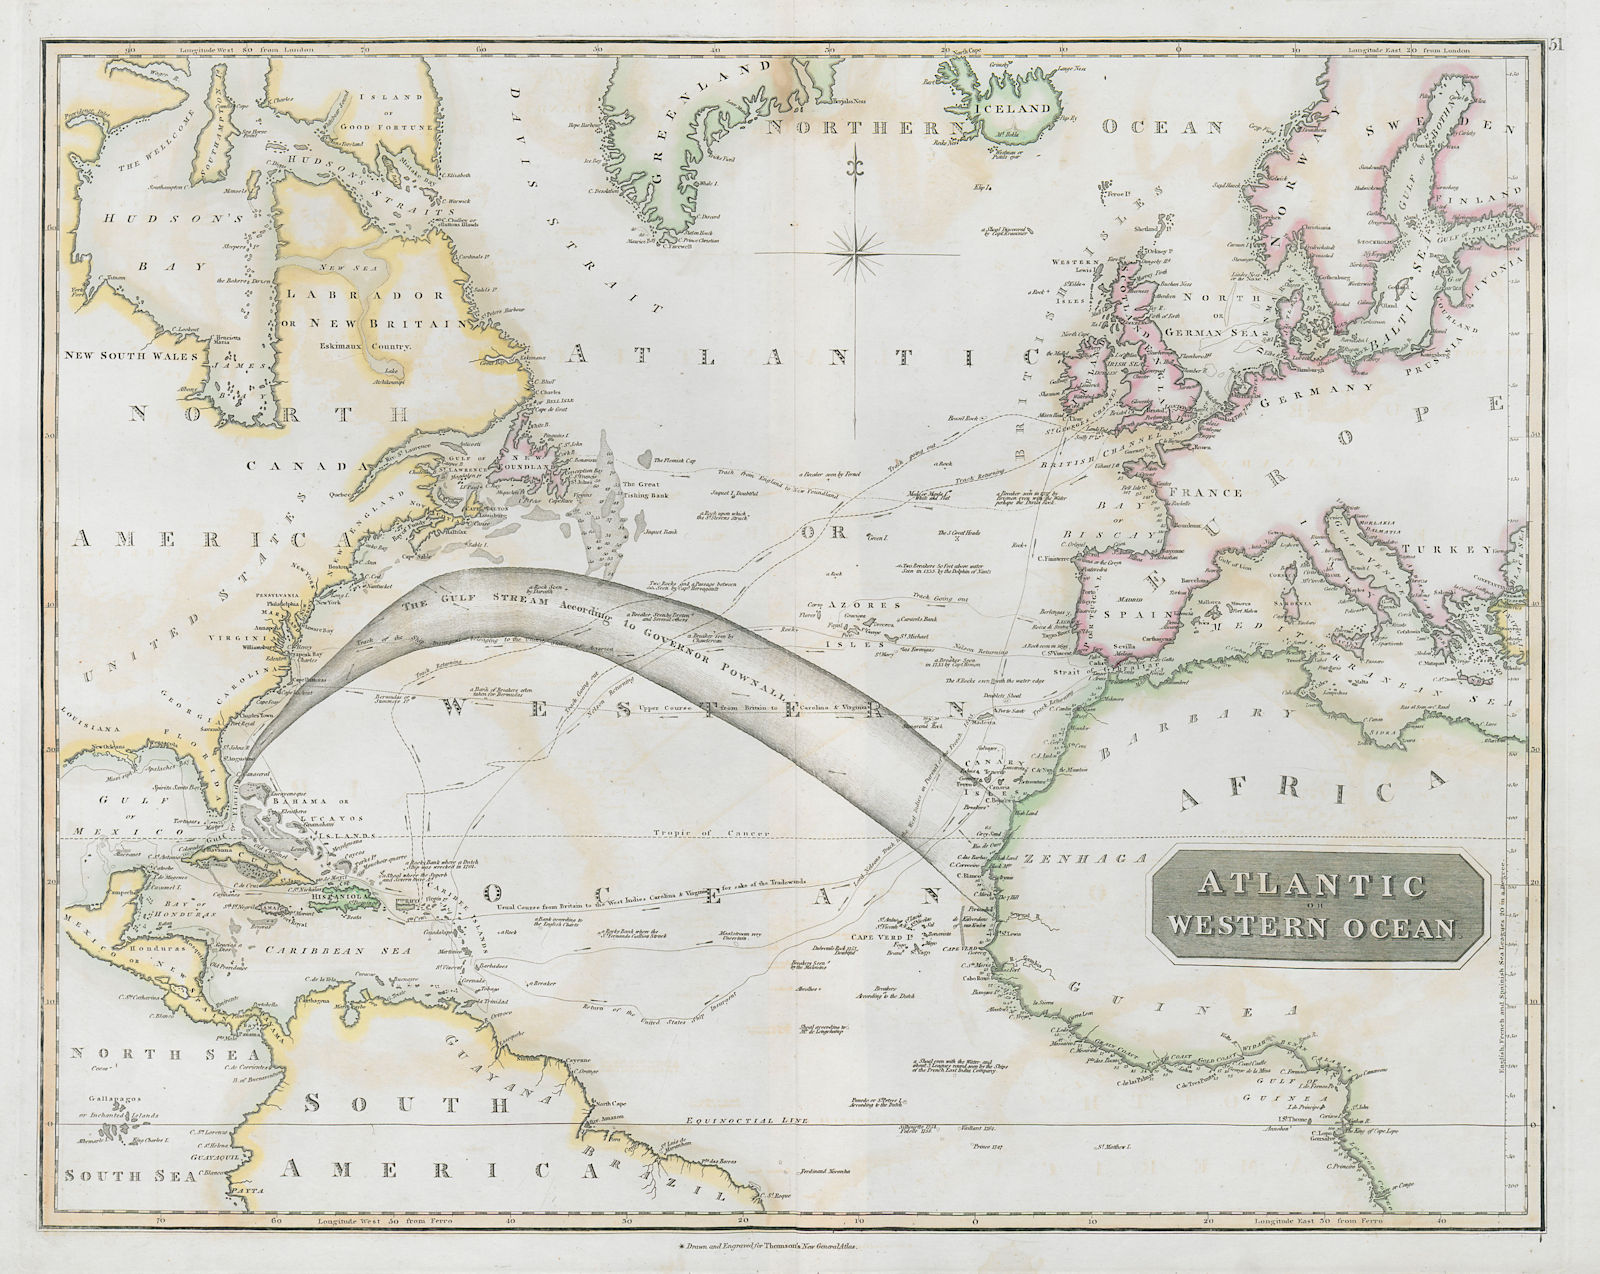 Associate Product Atlantic or Western Ocean. Gulf Stream, Nelson's & trade routes THOMSON 1830 map